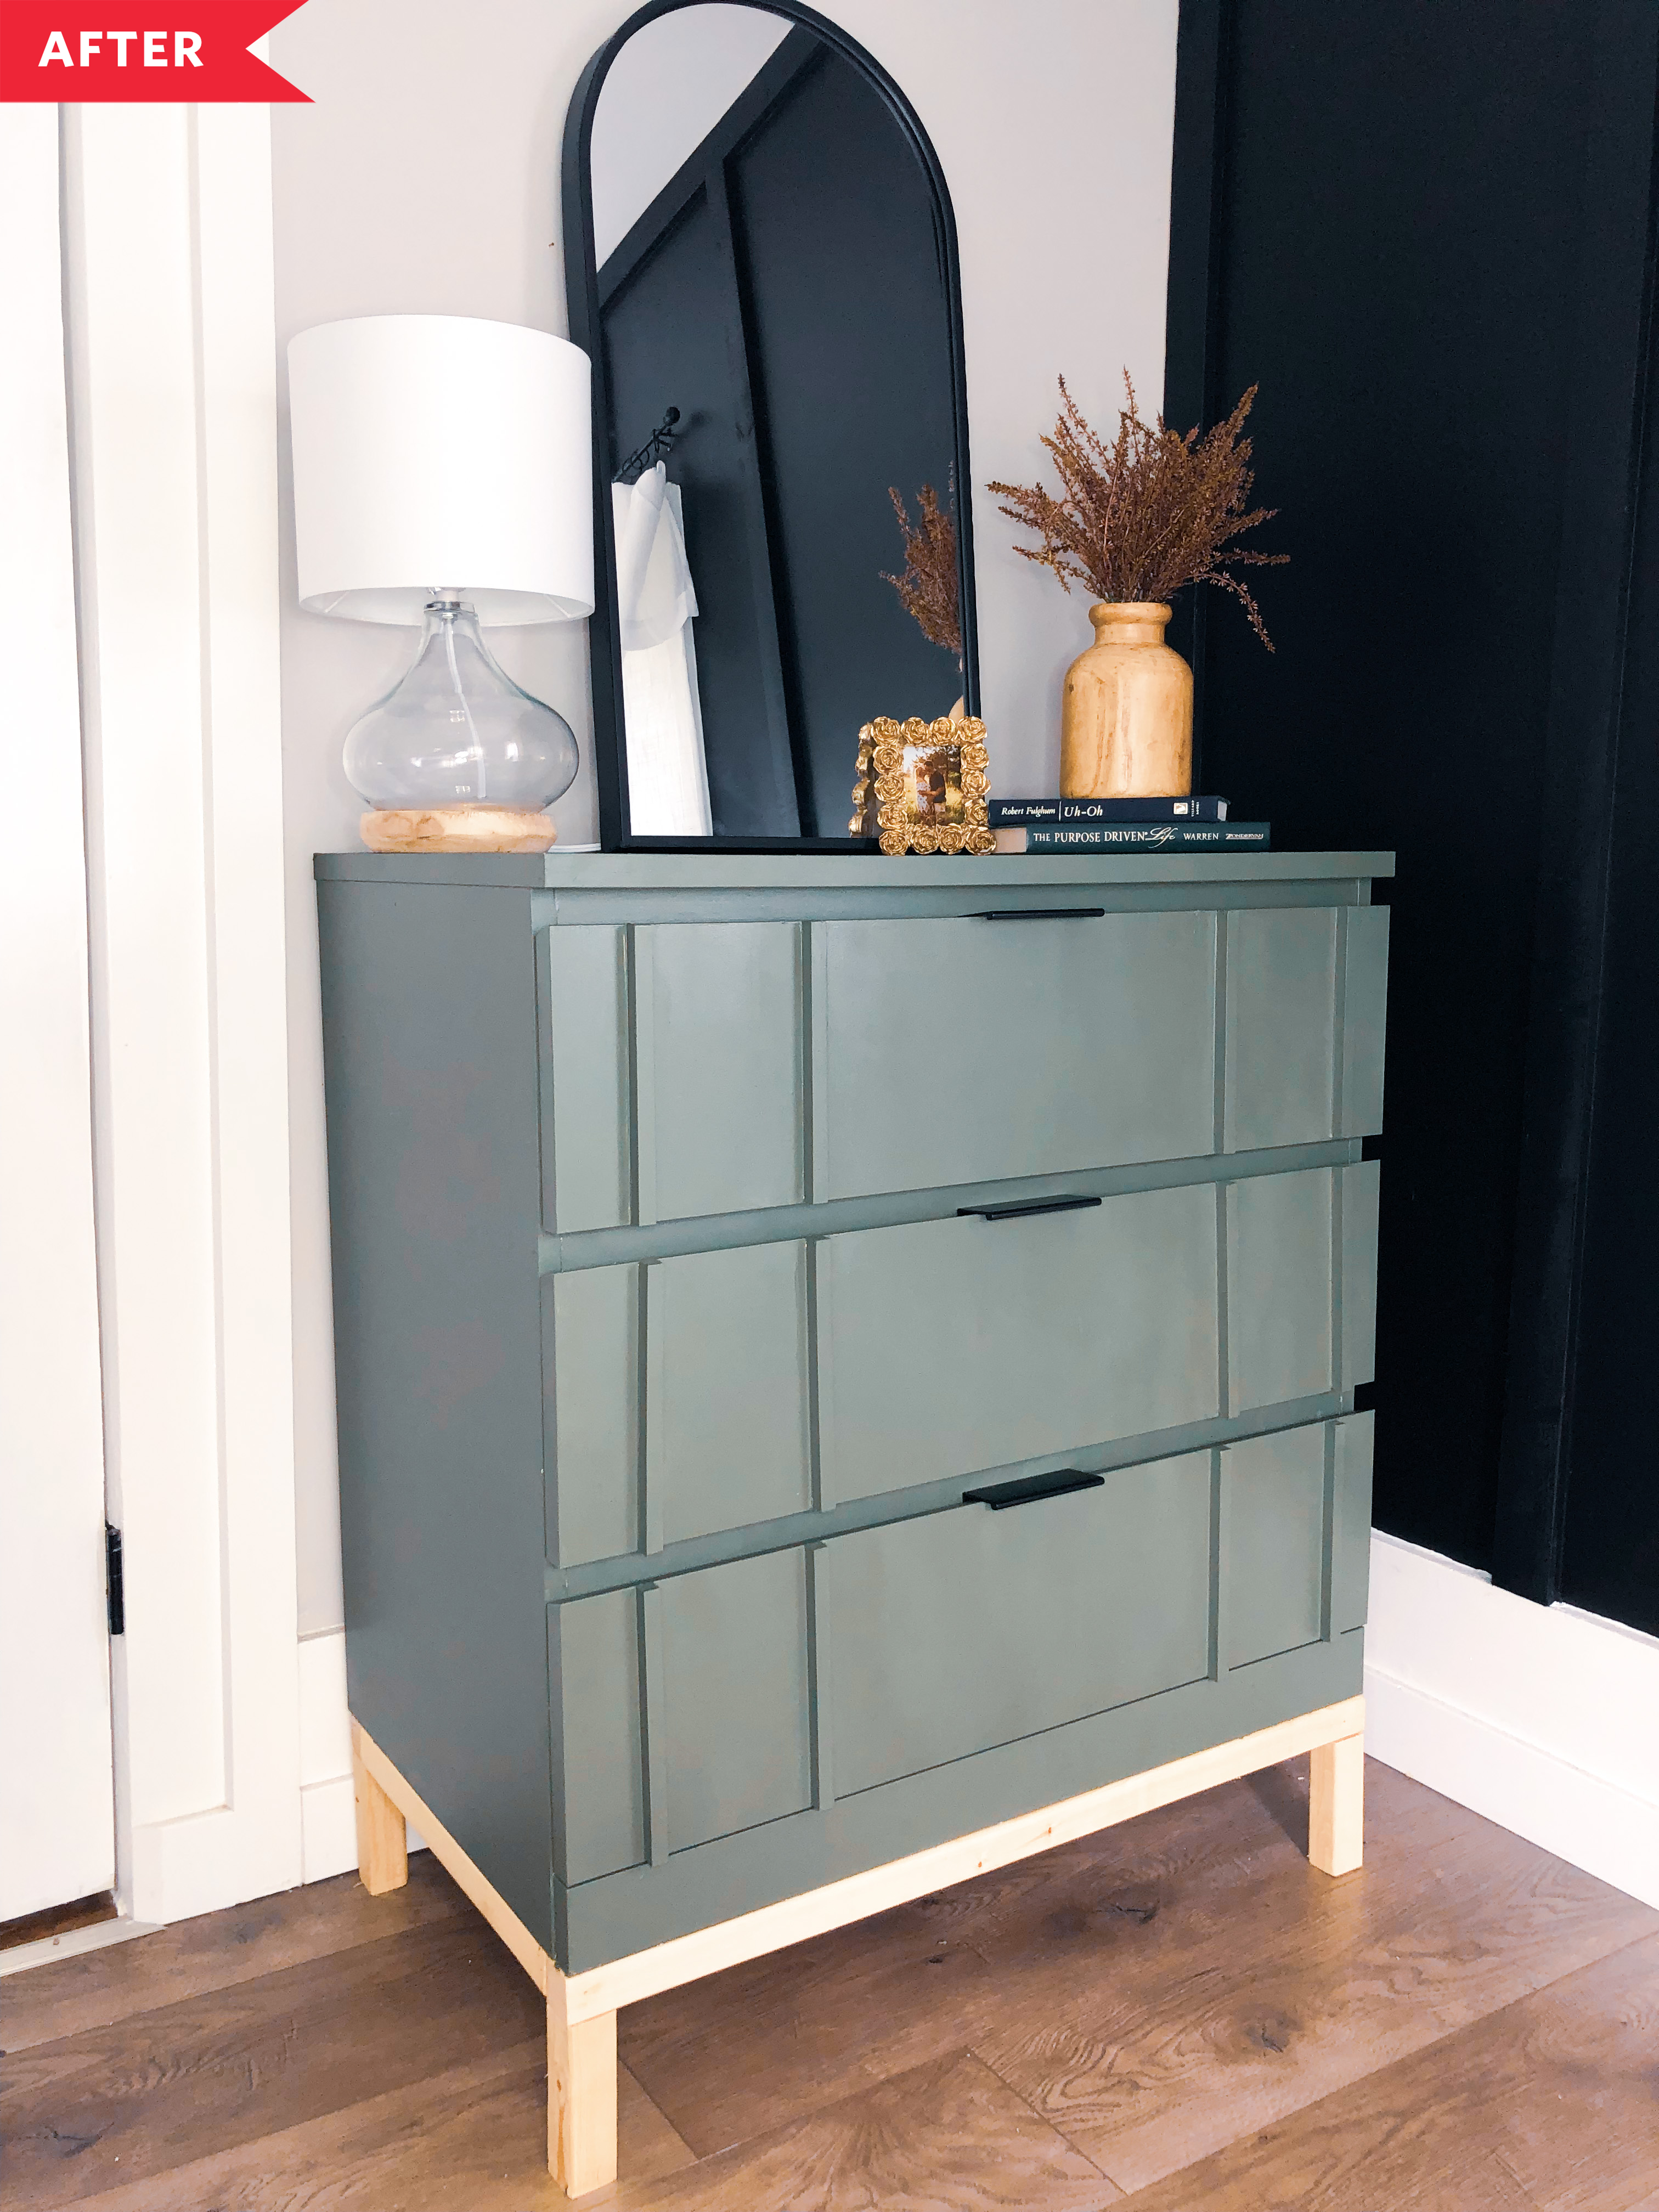 Inpakken palm Rondsel IKEA MALM Dresser Hack - Before and After Photos | Apartment Therapy